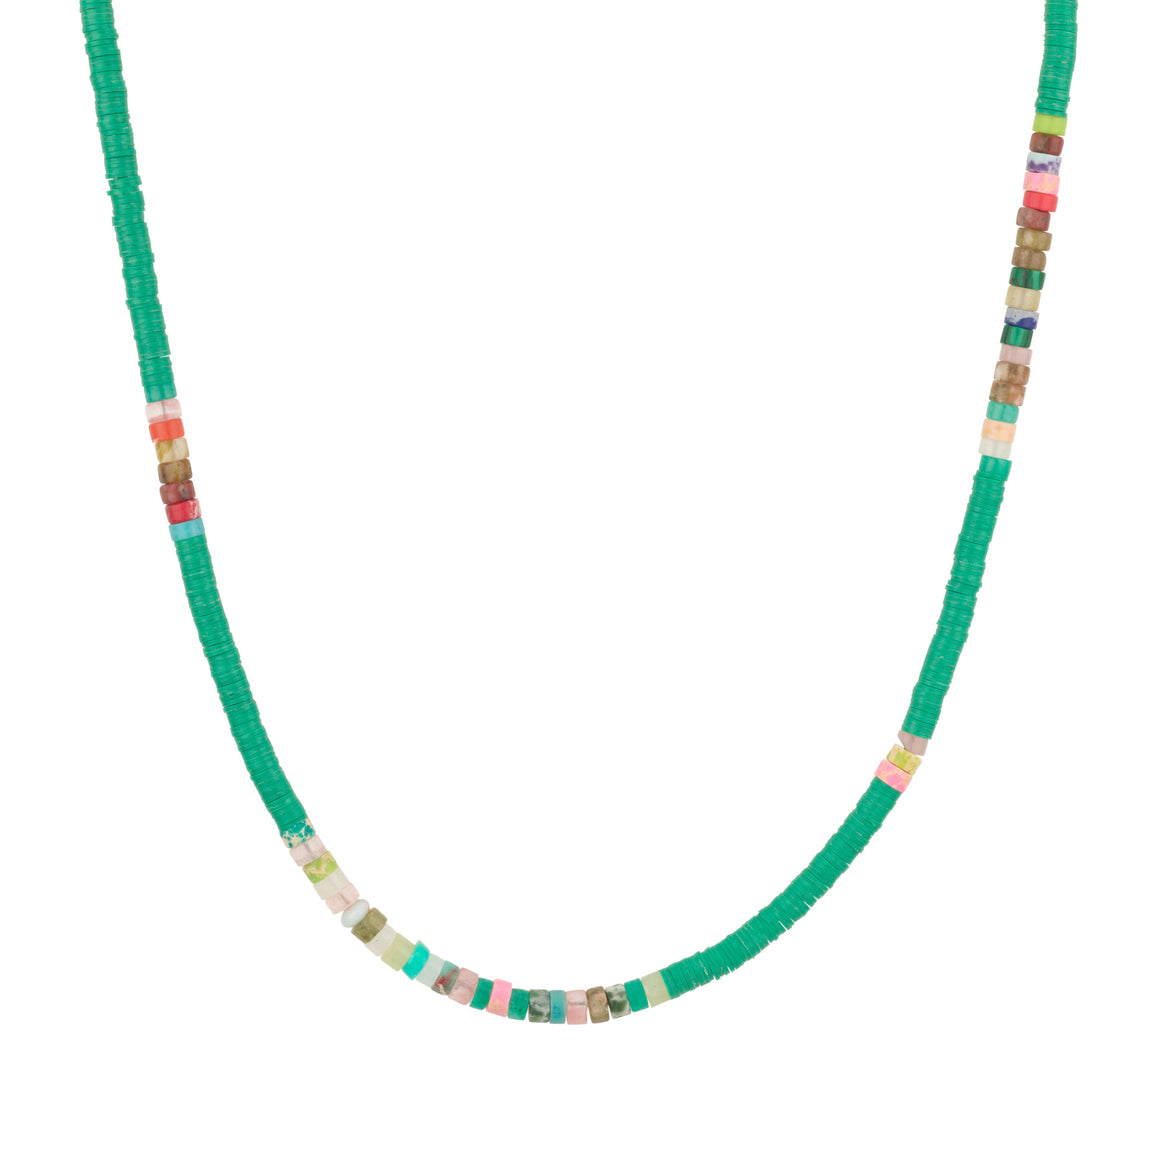 Pa'ani Necklace in Passion